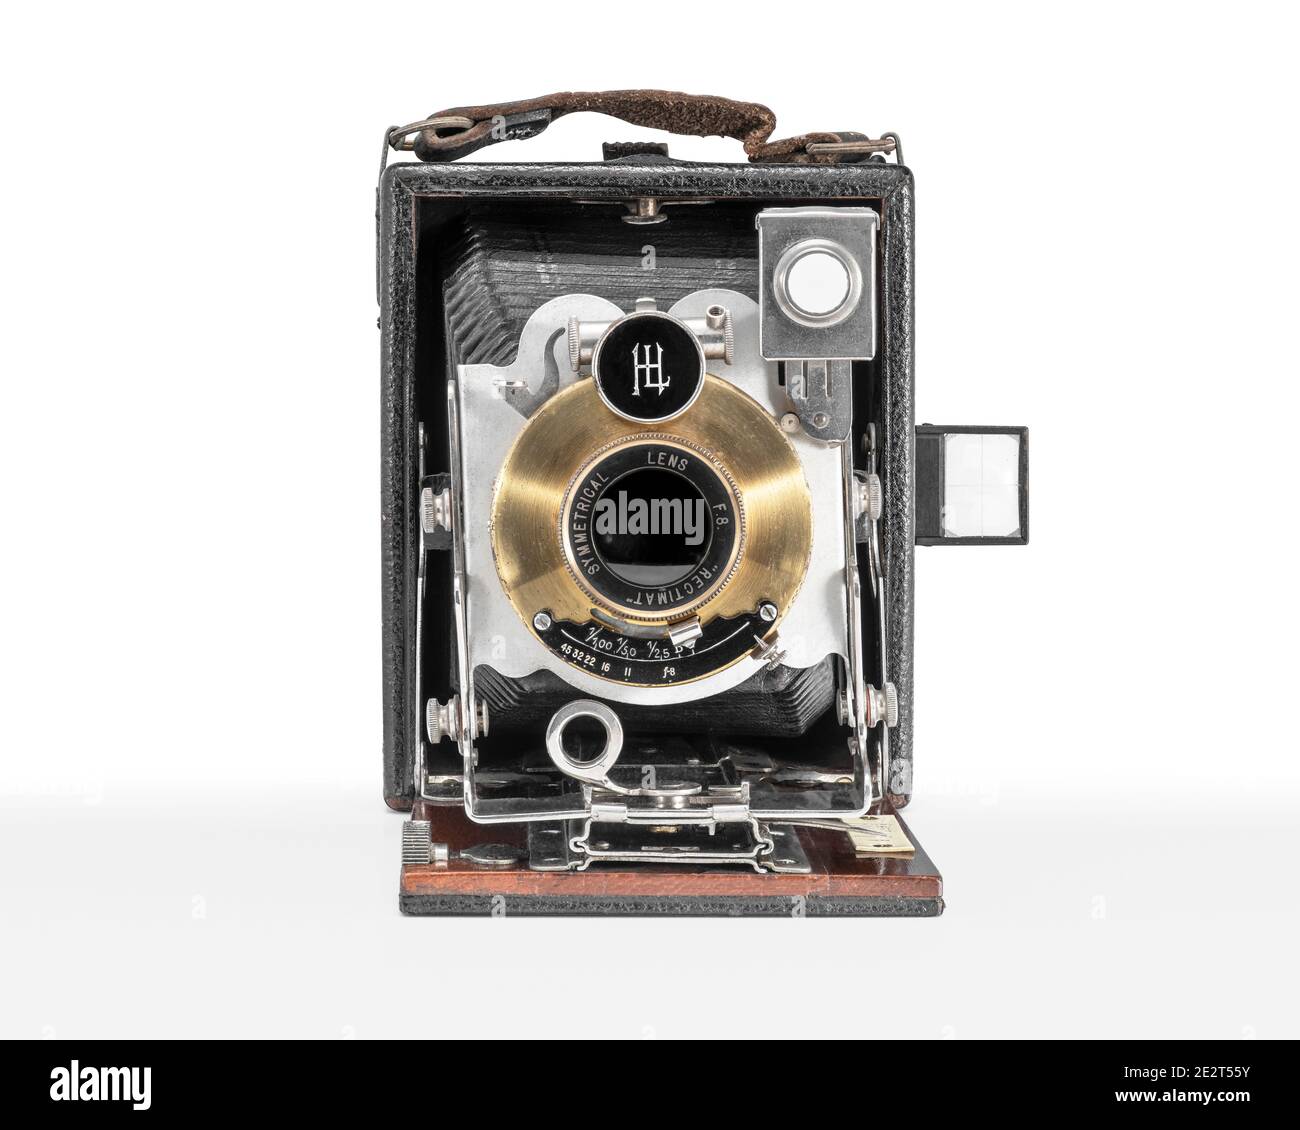 ENSIGN KLITO FOLDING PLATE CAMERA RECTIMAT SYMMETRICAL Houghton Ensign Klito. Bellows Rack and Pinion Focusing Double Extension. Clipping Path in JPEG Stock Photo